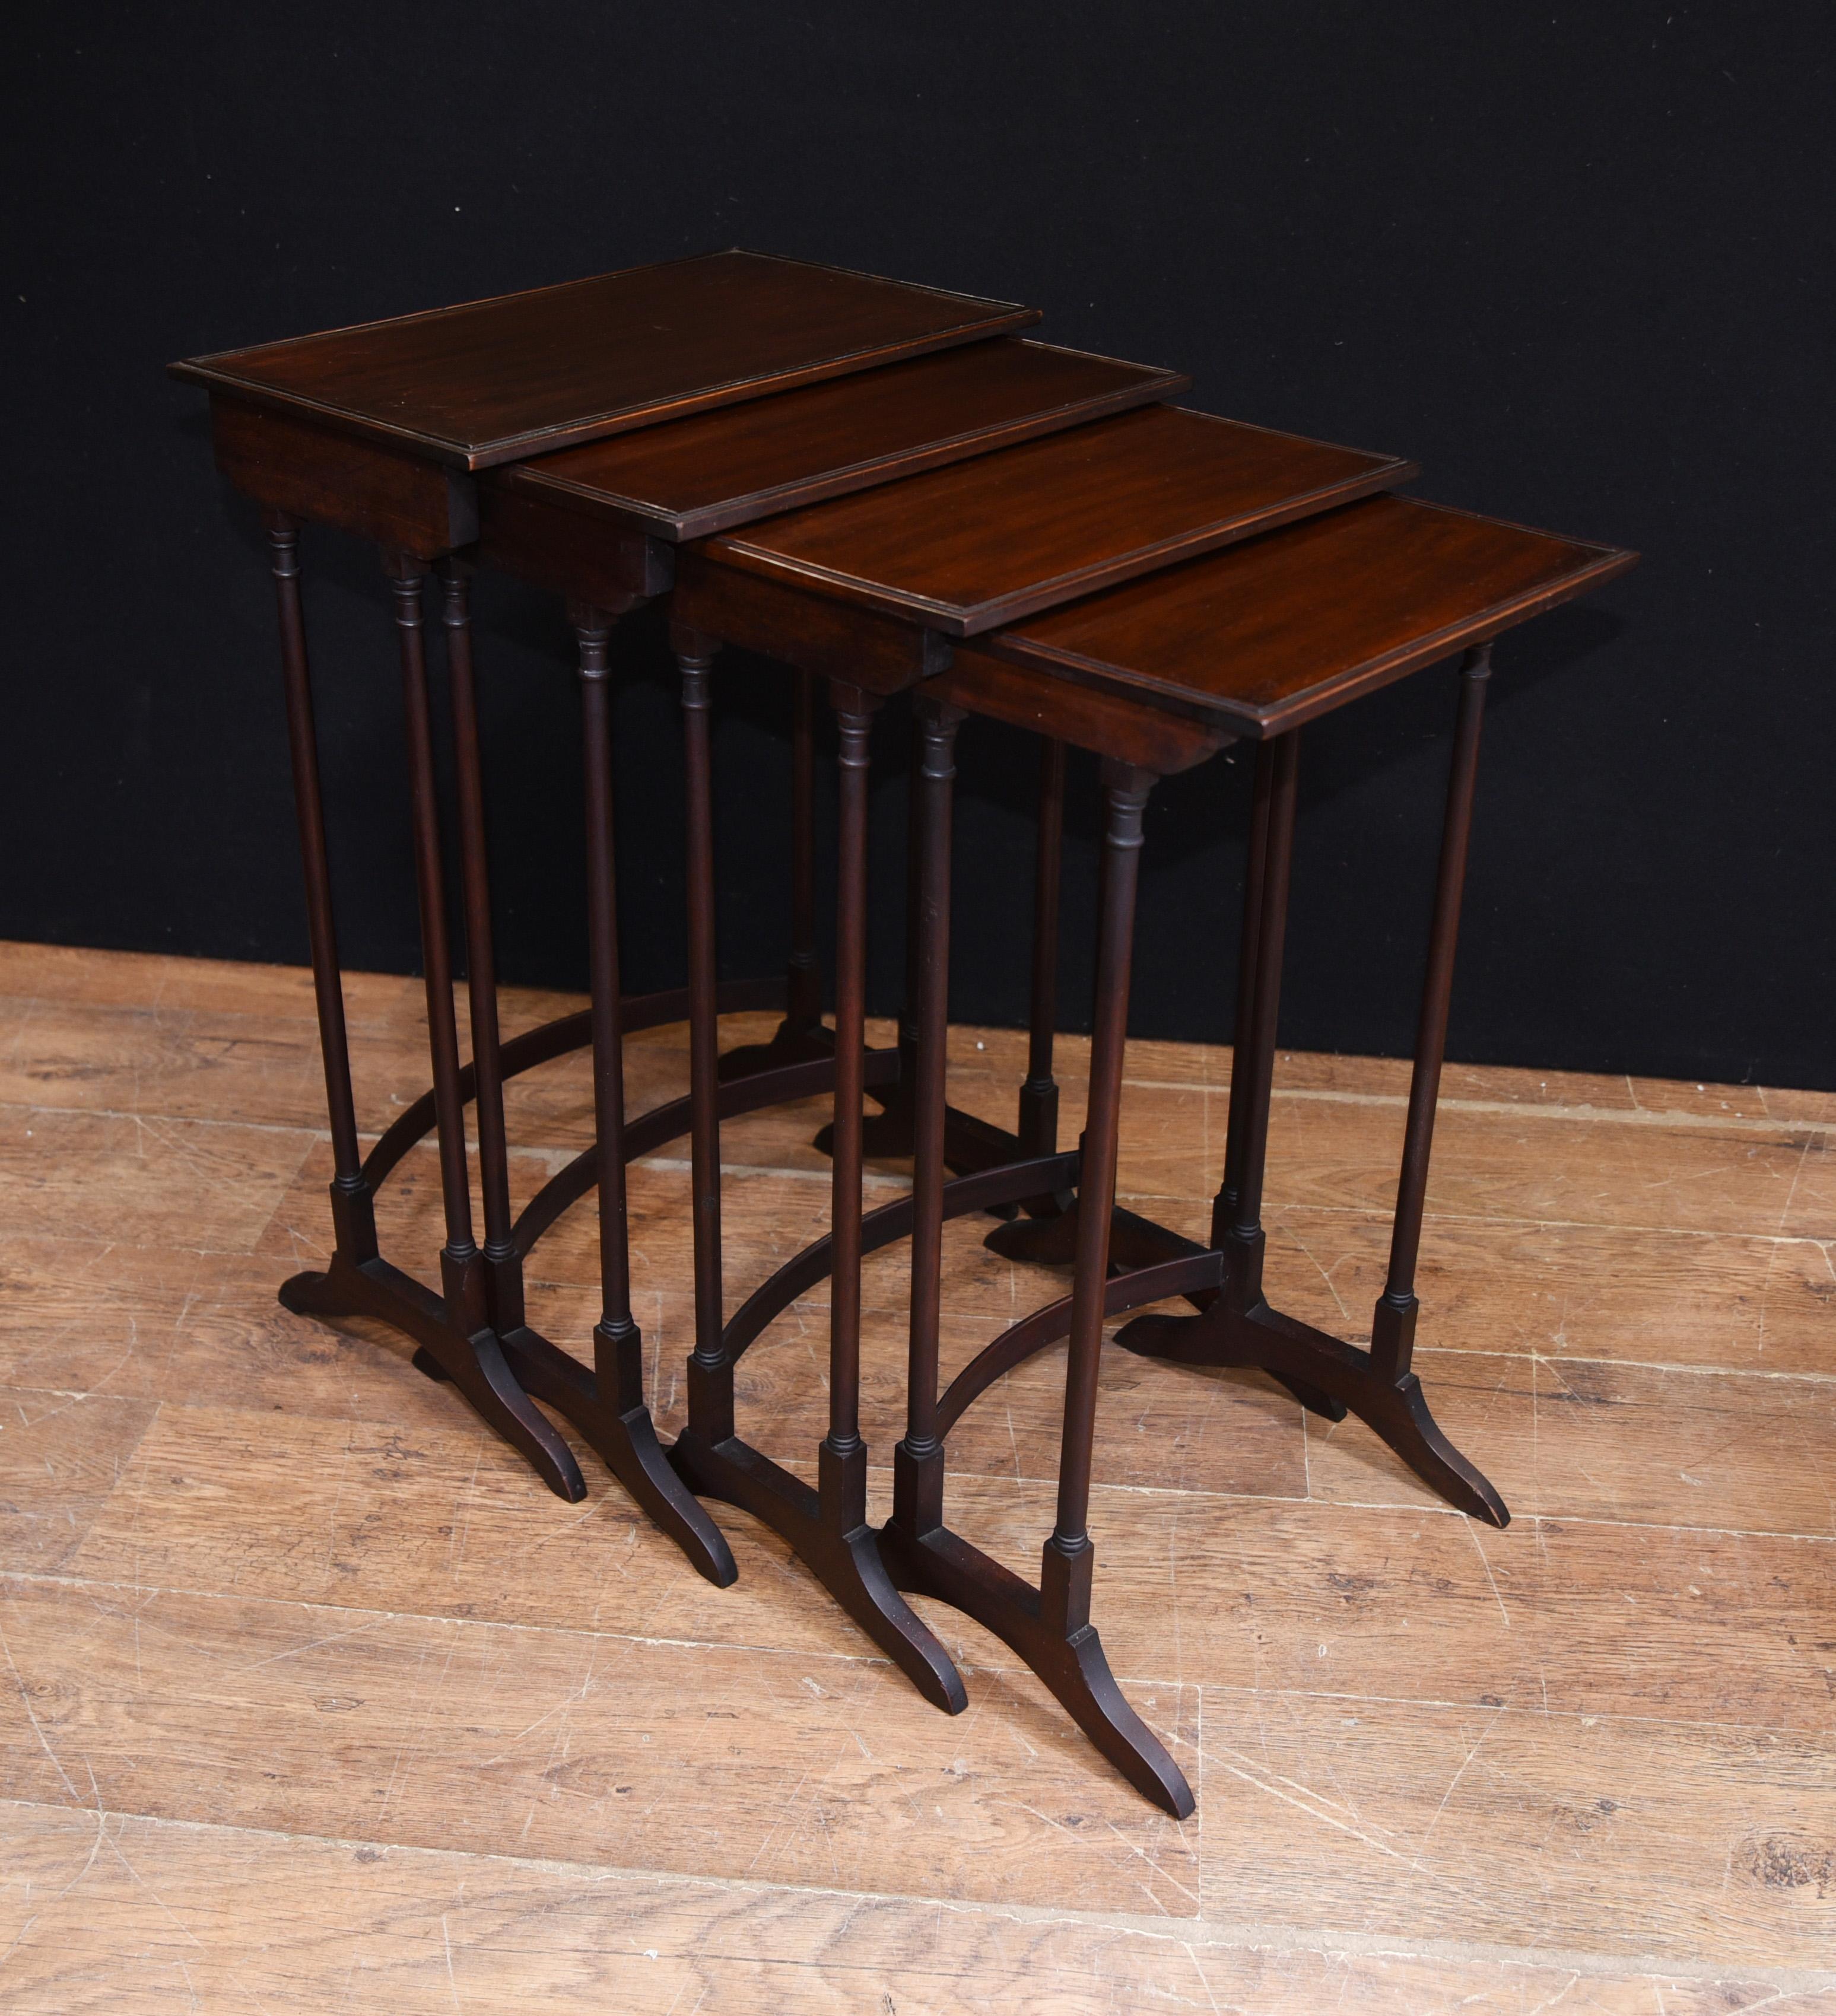 Regency Quartetto nest of tables set four 

- English Regency nest of Quartetto tea tables 
- Set of four in mahogany 
- Great for a drinks party as you can pull them out as needed
- Viewings available by appointment
- Offered in great shape